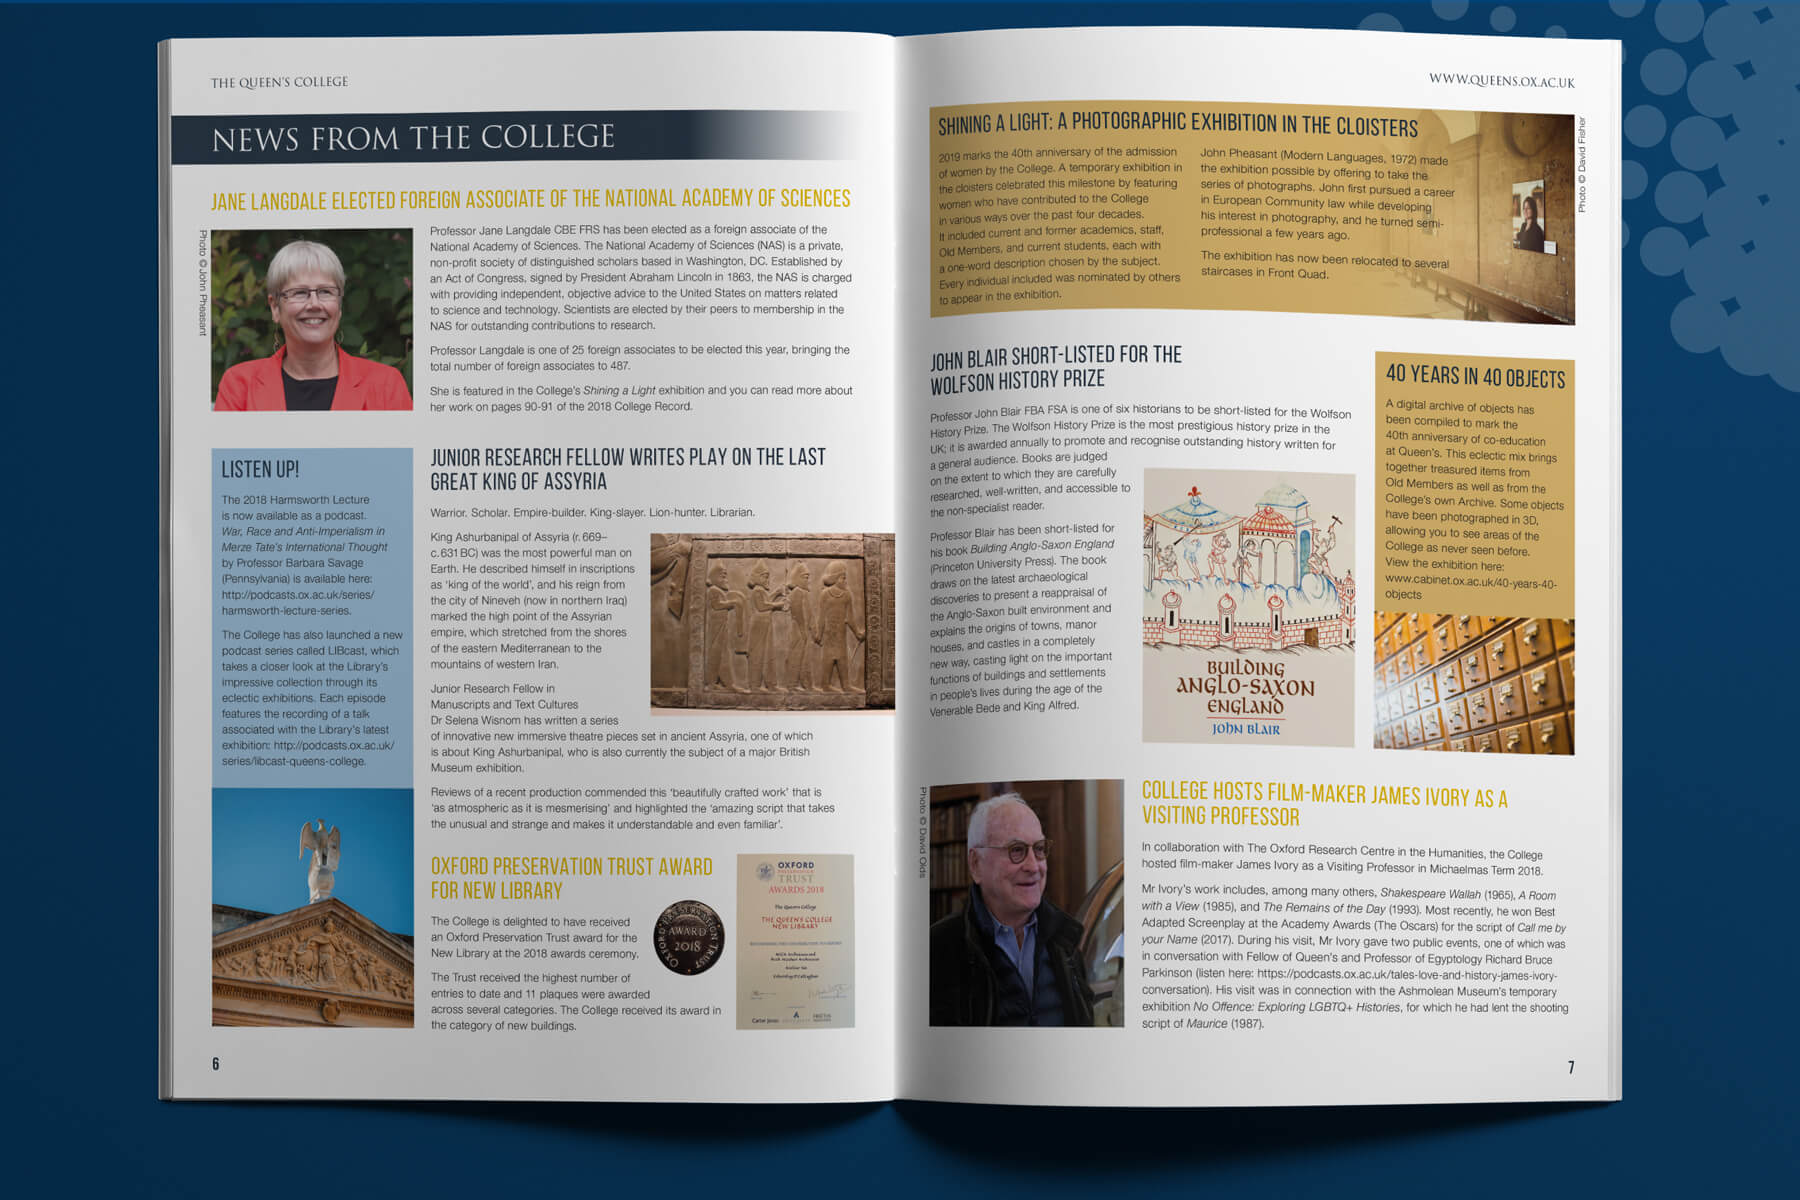 The Queen's College Newsletter inside spread